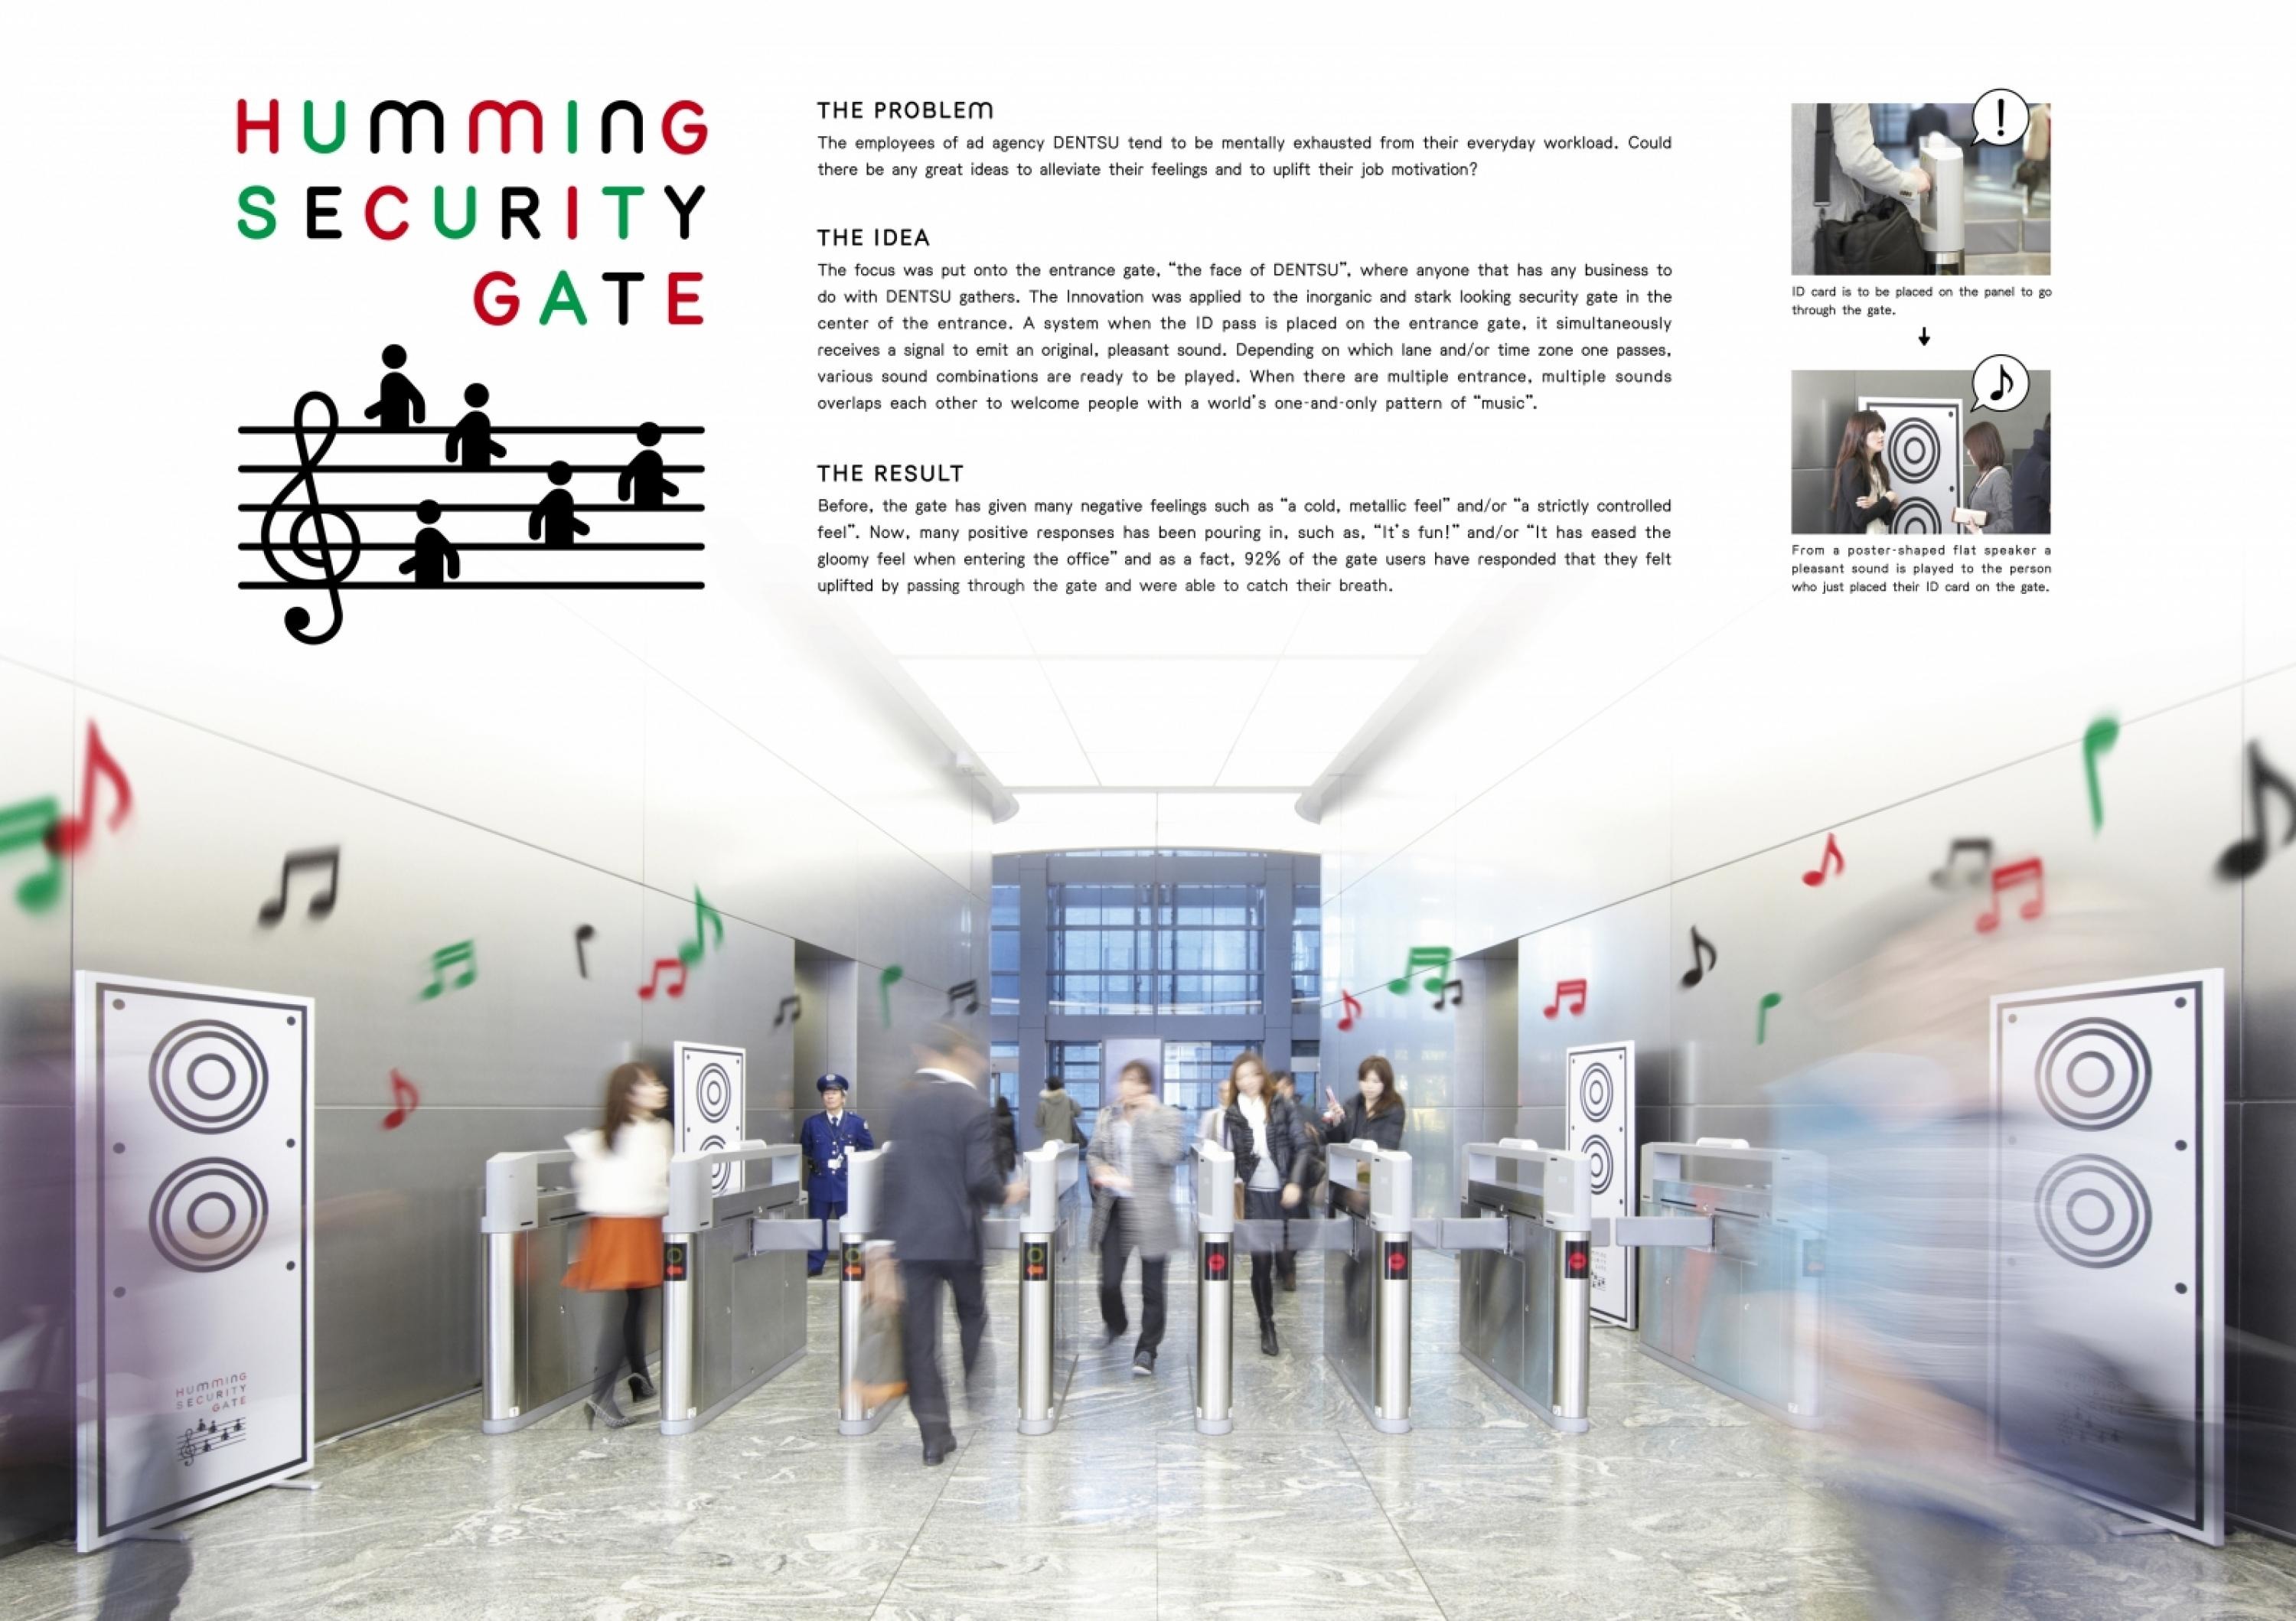 HUMMING SECURITY GATE